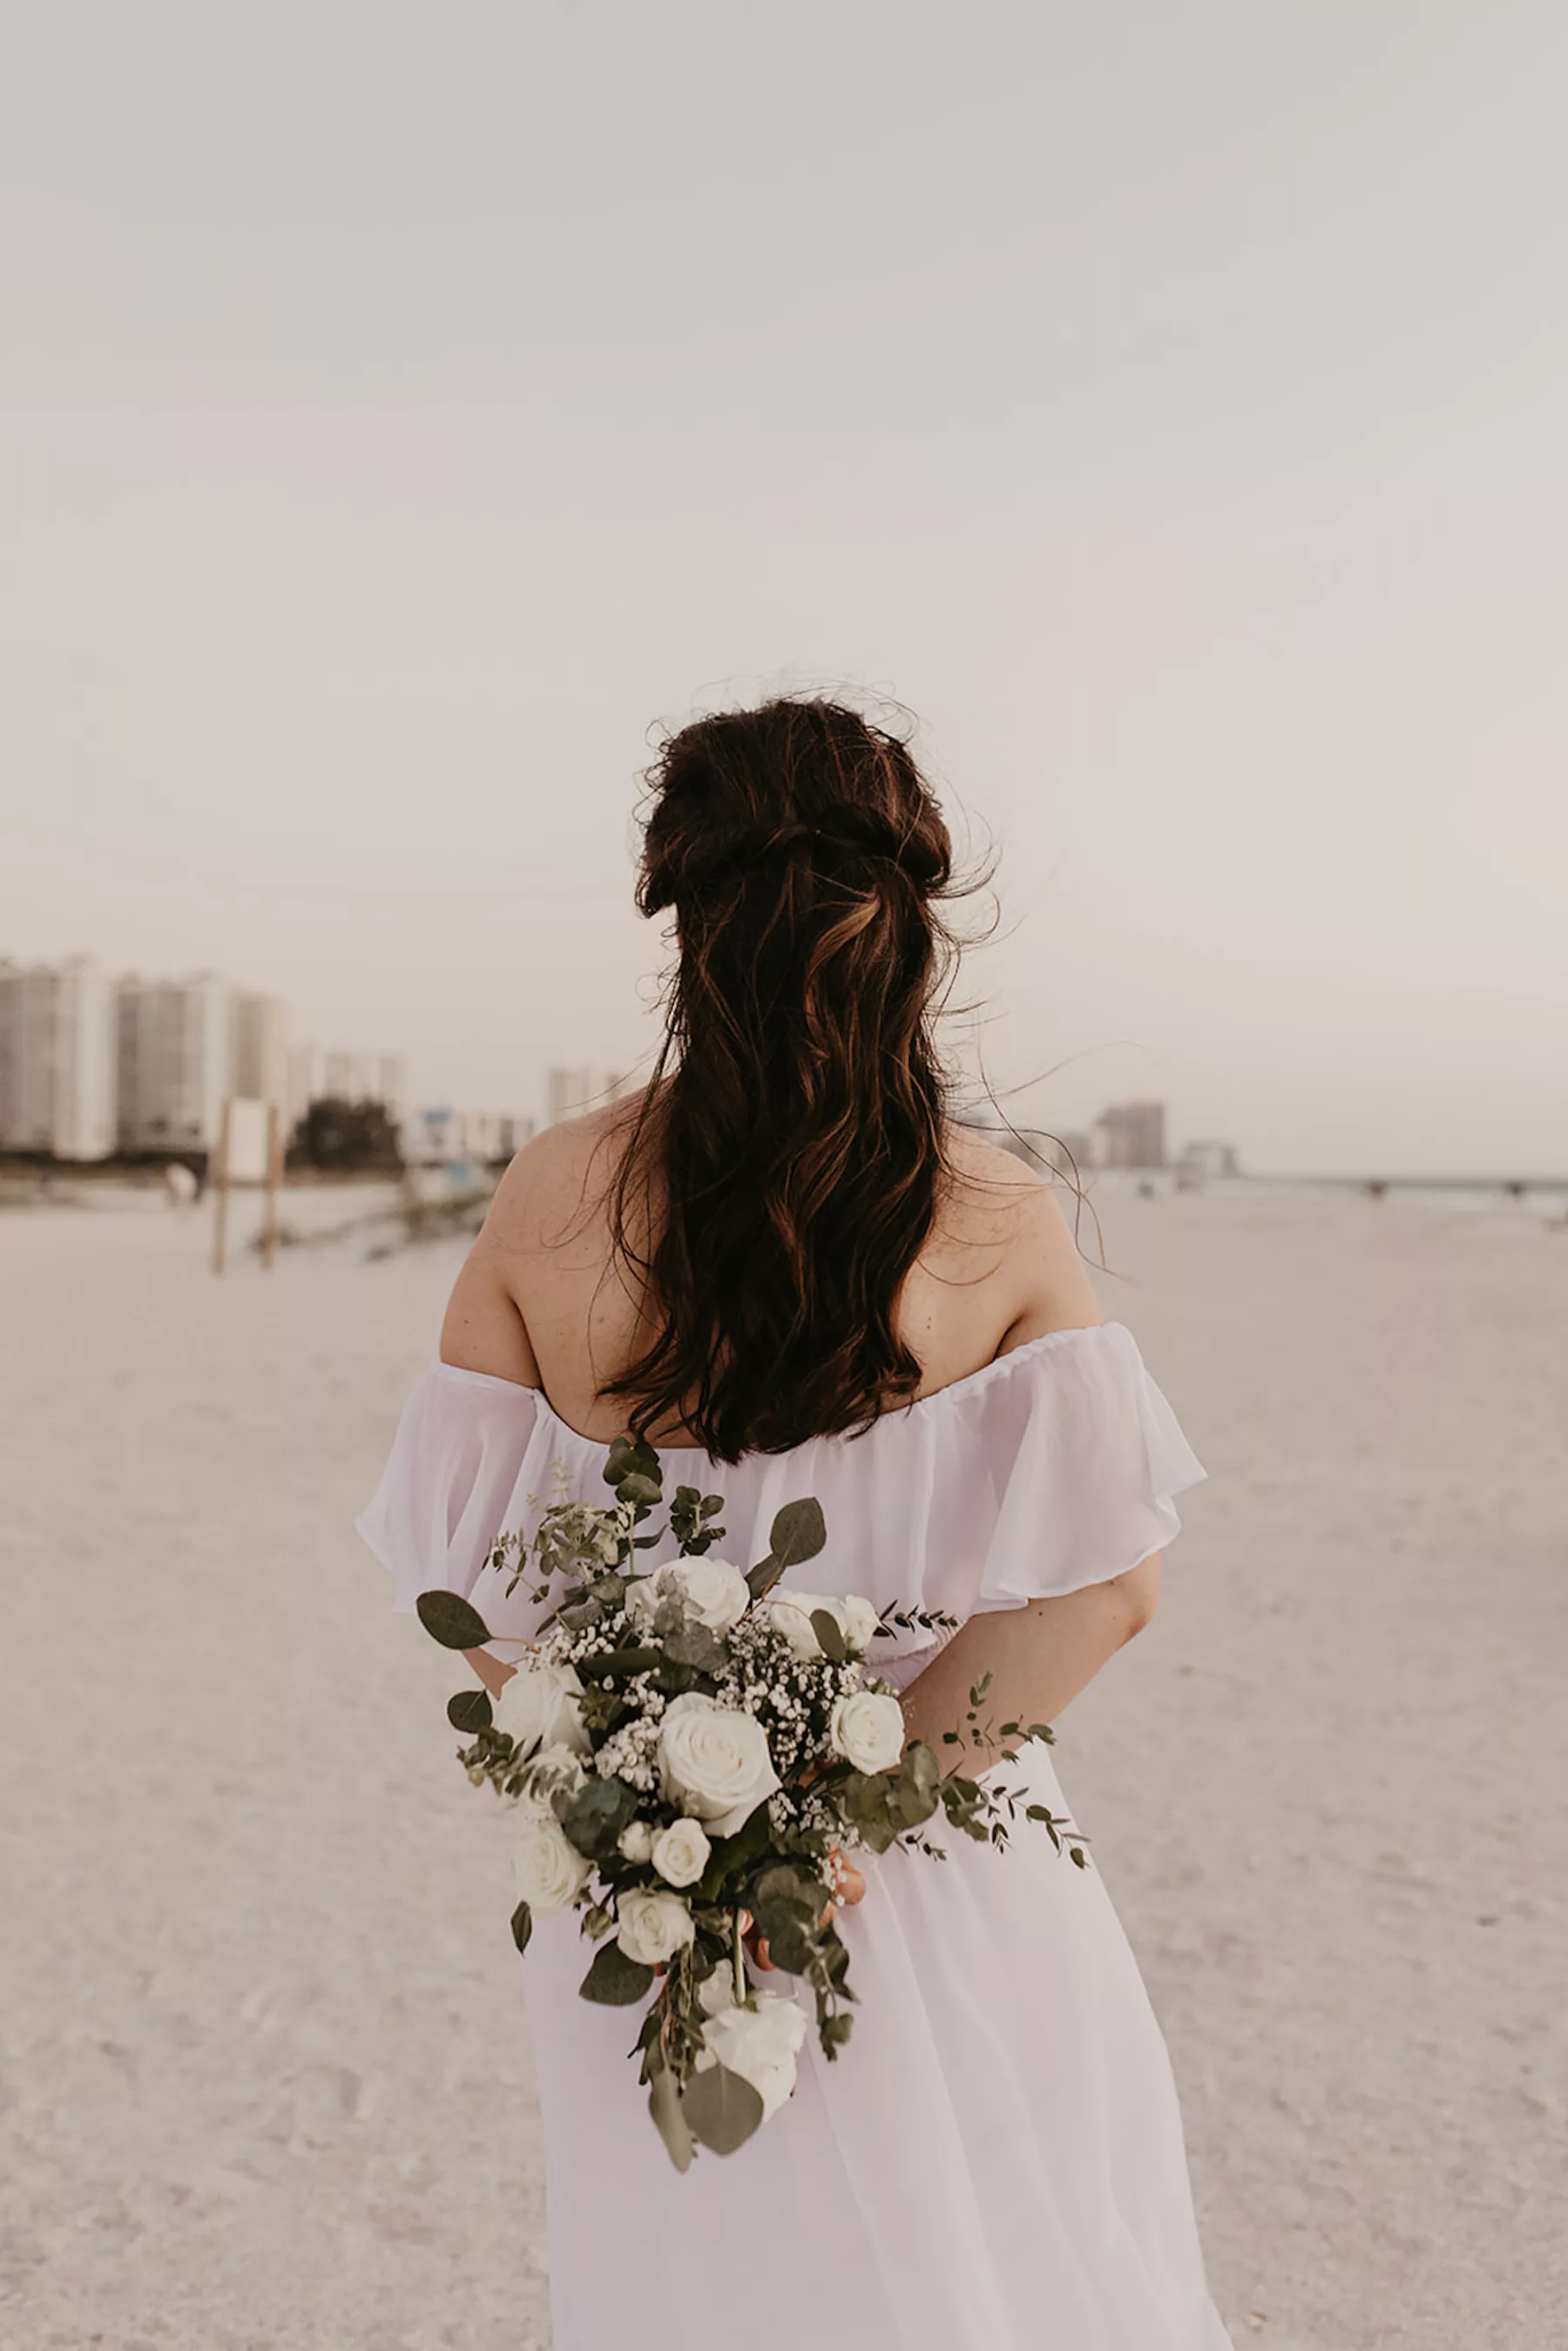 Spring Beach Wedding Bouquet Ideas | White Roses, Baby's Breath, and Greenery Floral Arrangement Inspiration | Tampa Bay Florist Lemon Drops